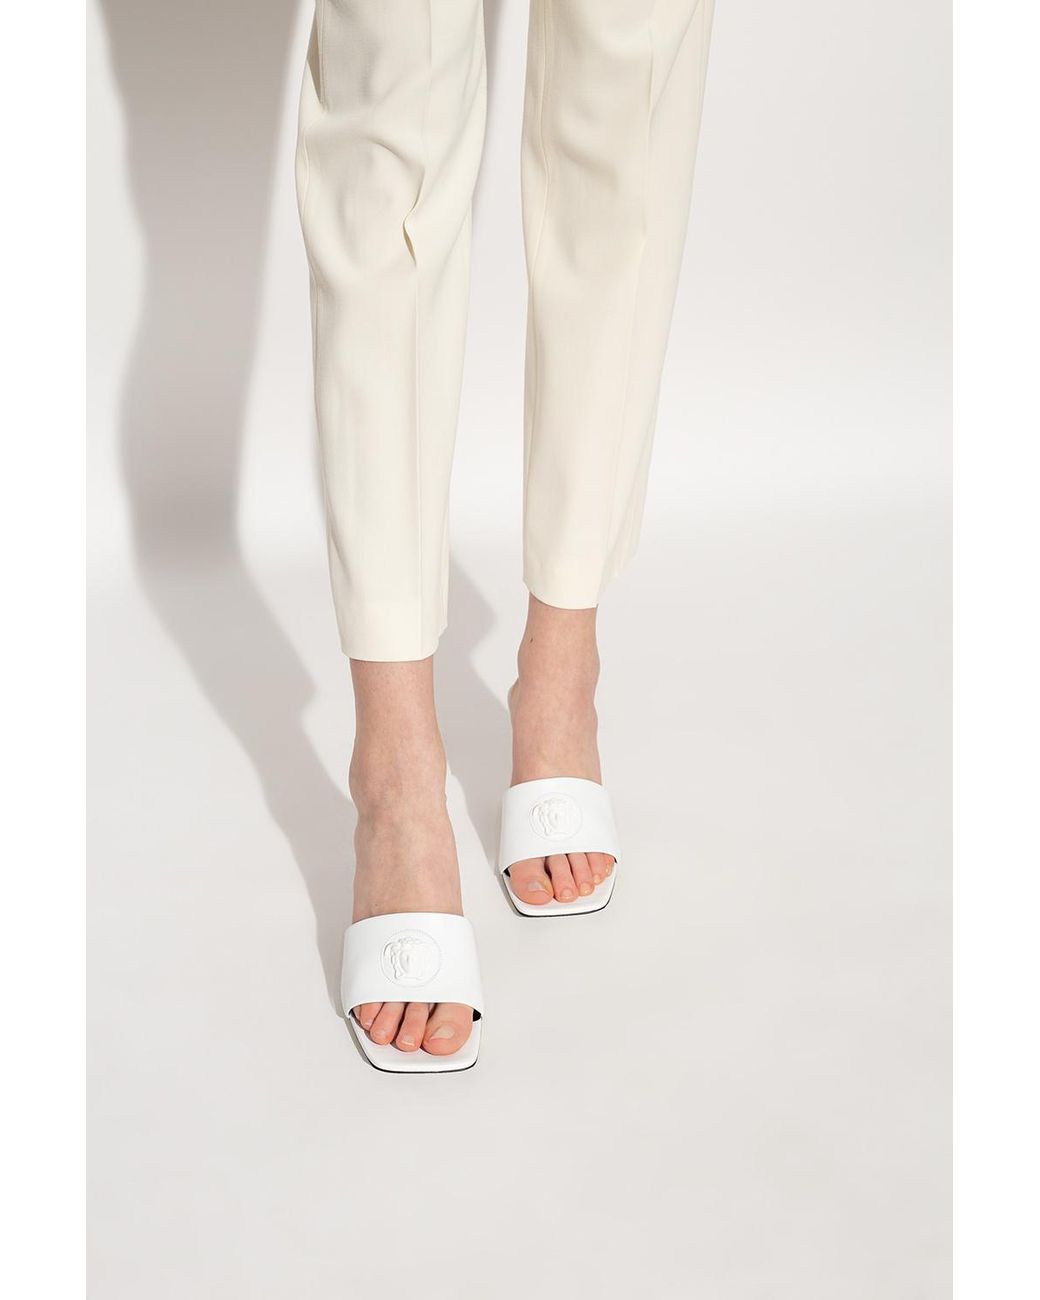 Versace Leather 'la Medusa' Heeled Mules in White - Lyst